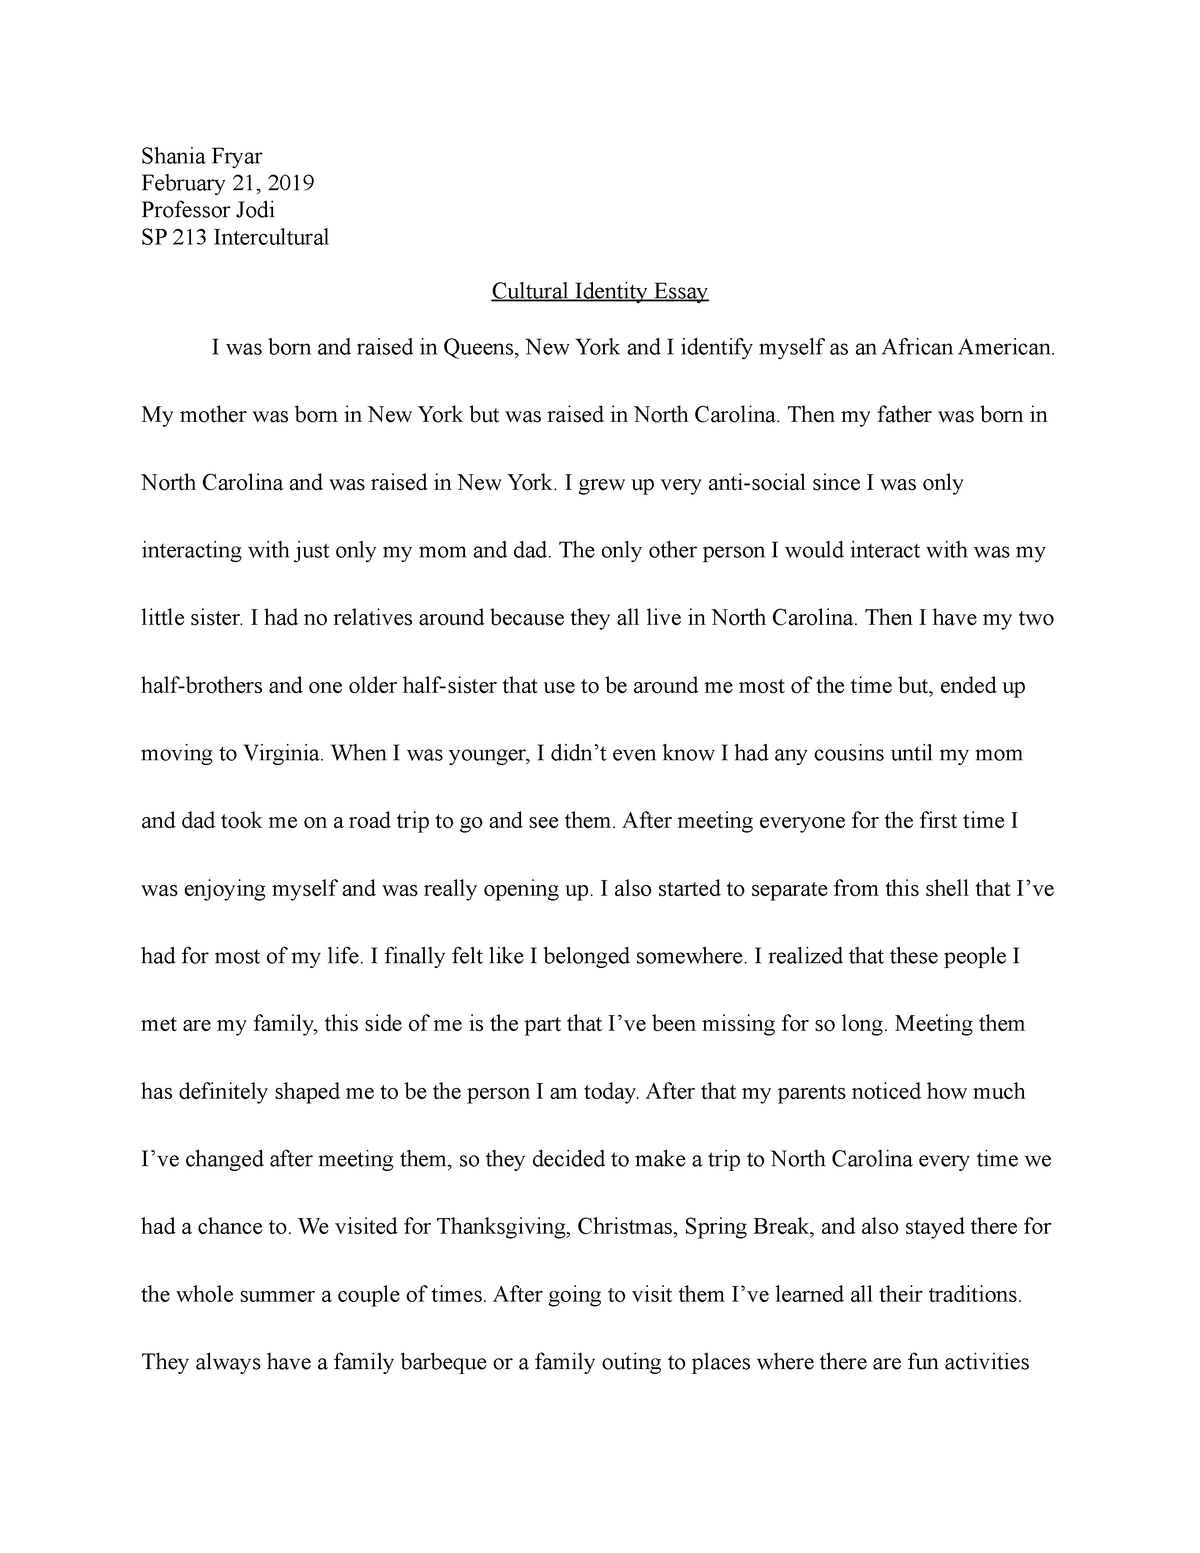 cultural identity college essay example